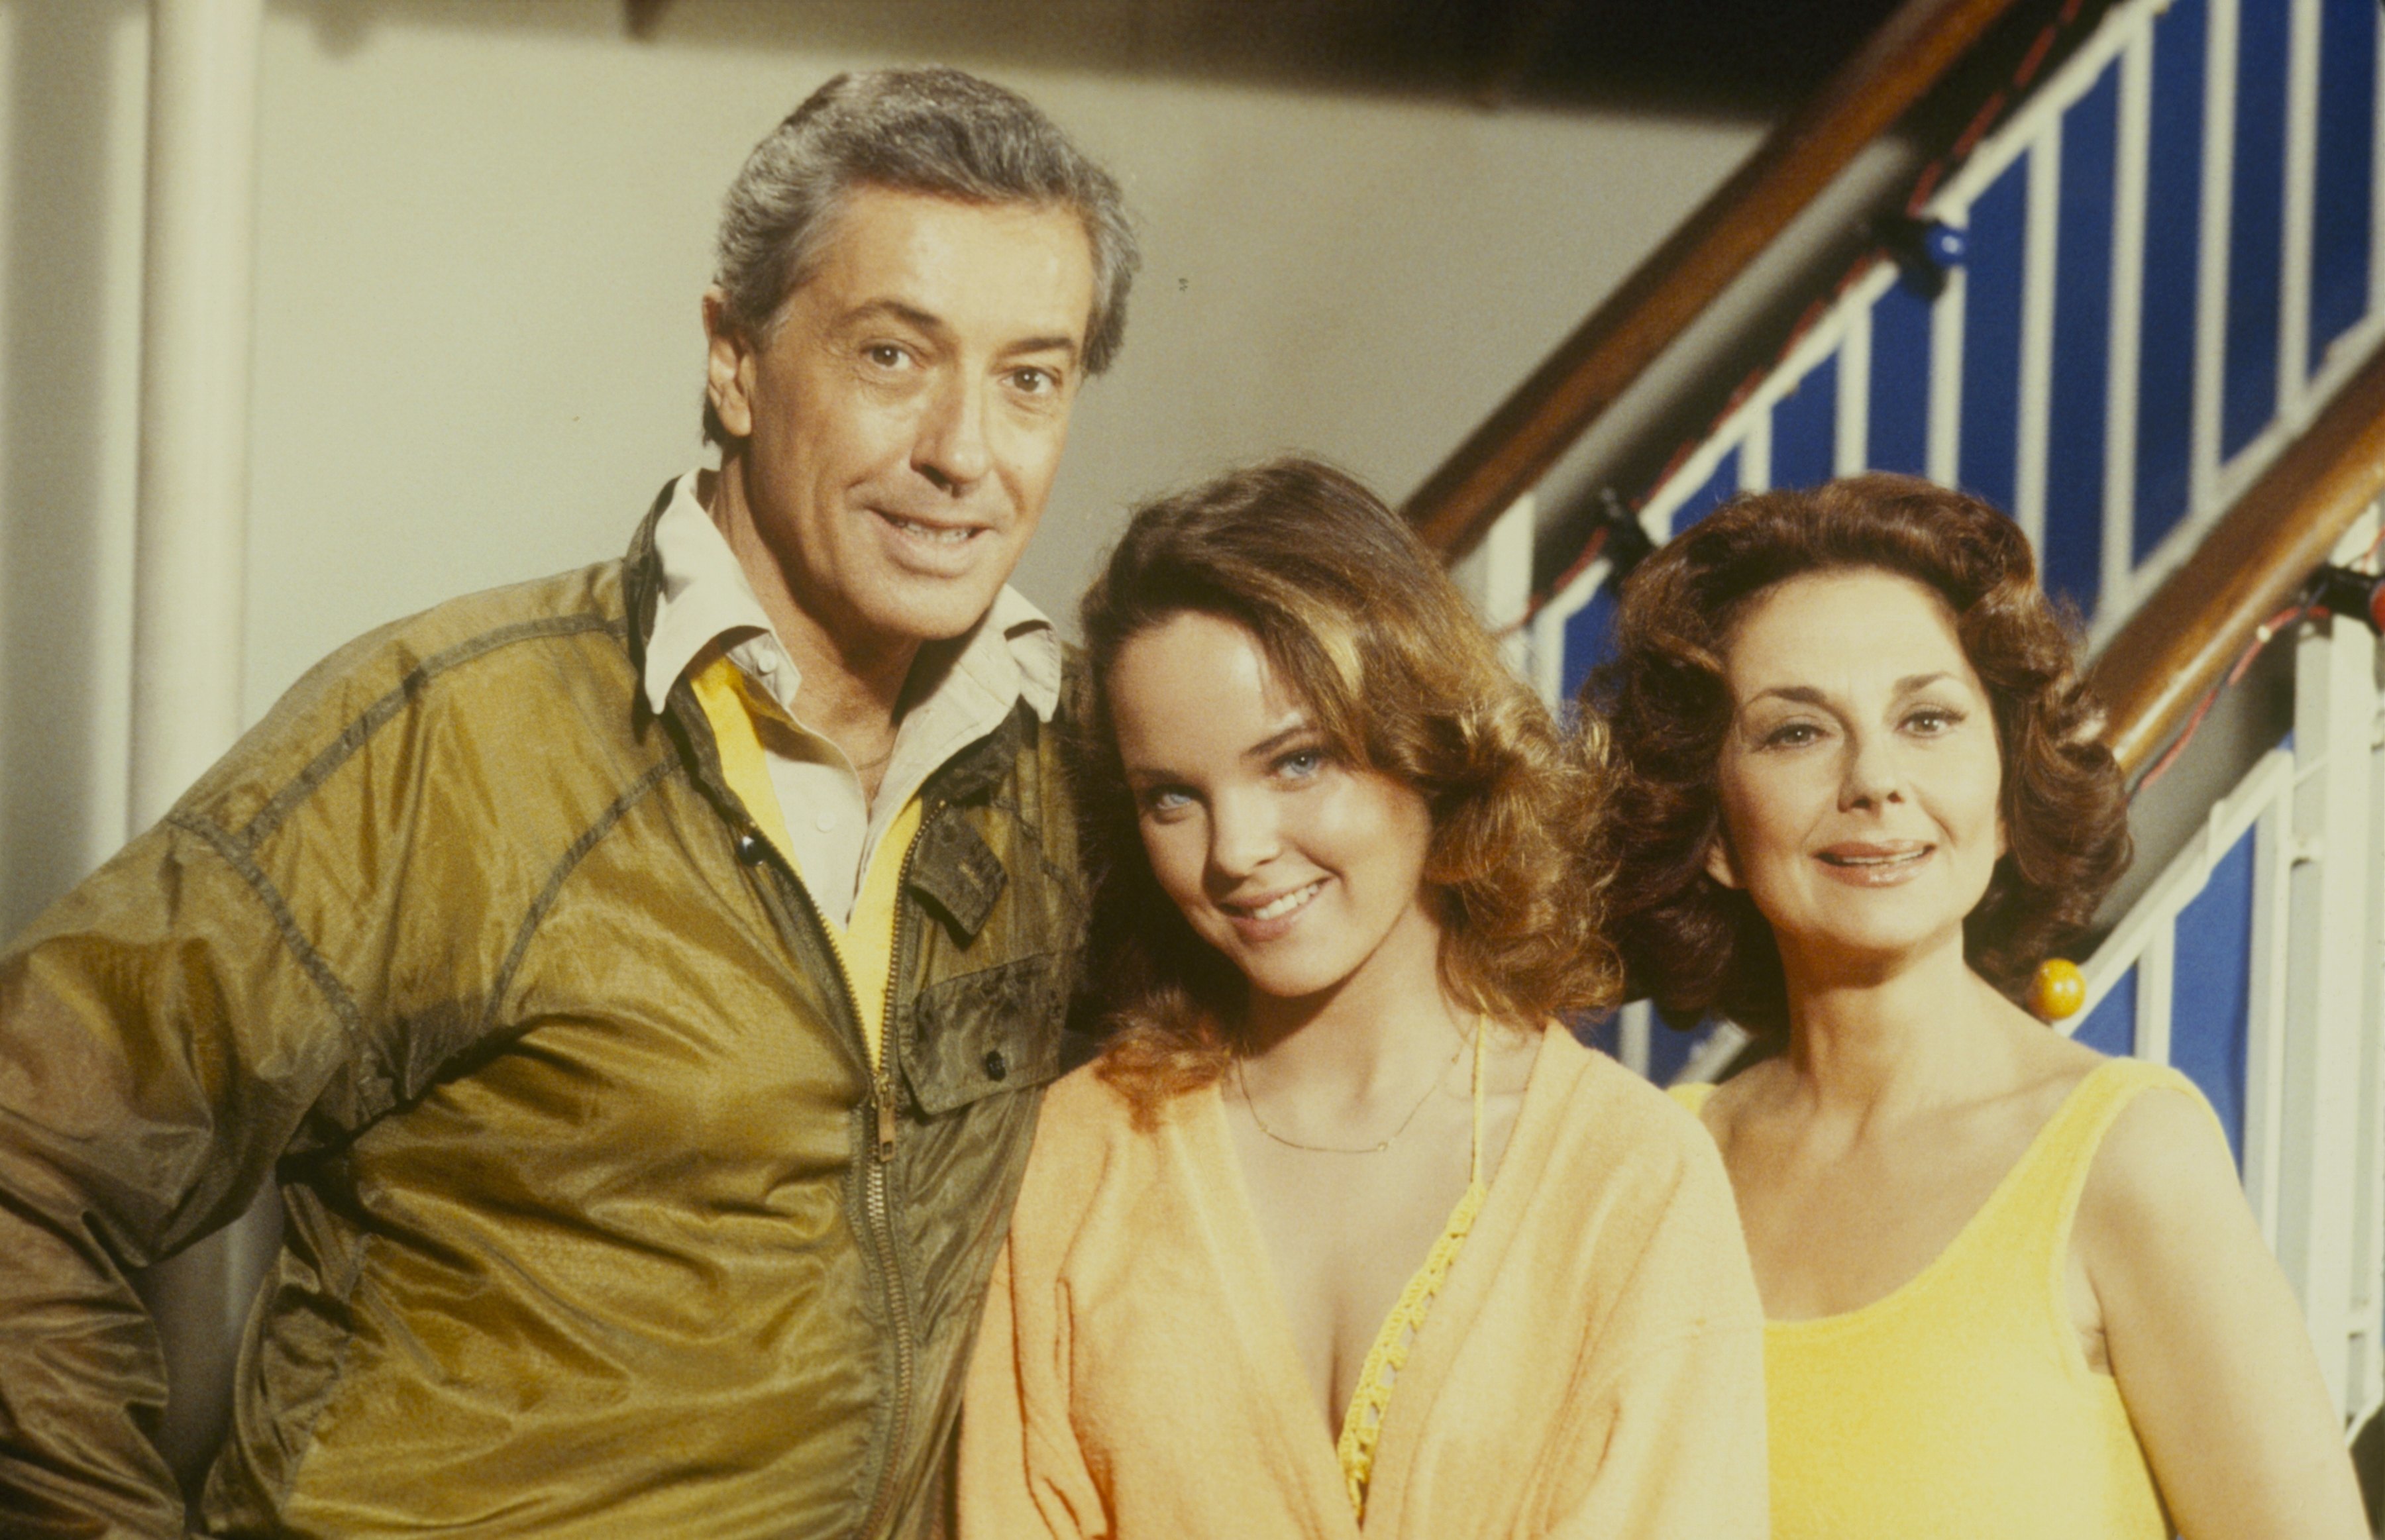 Farley Granger, Melissa Sue Anderson, And Joan Lorring in "The Love Boat." | Source: Getty Images